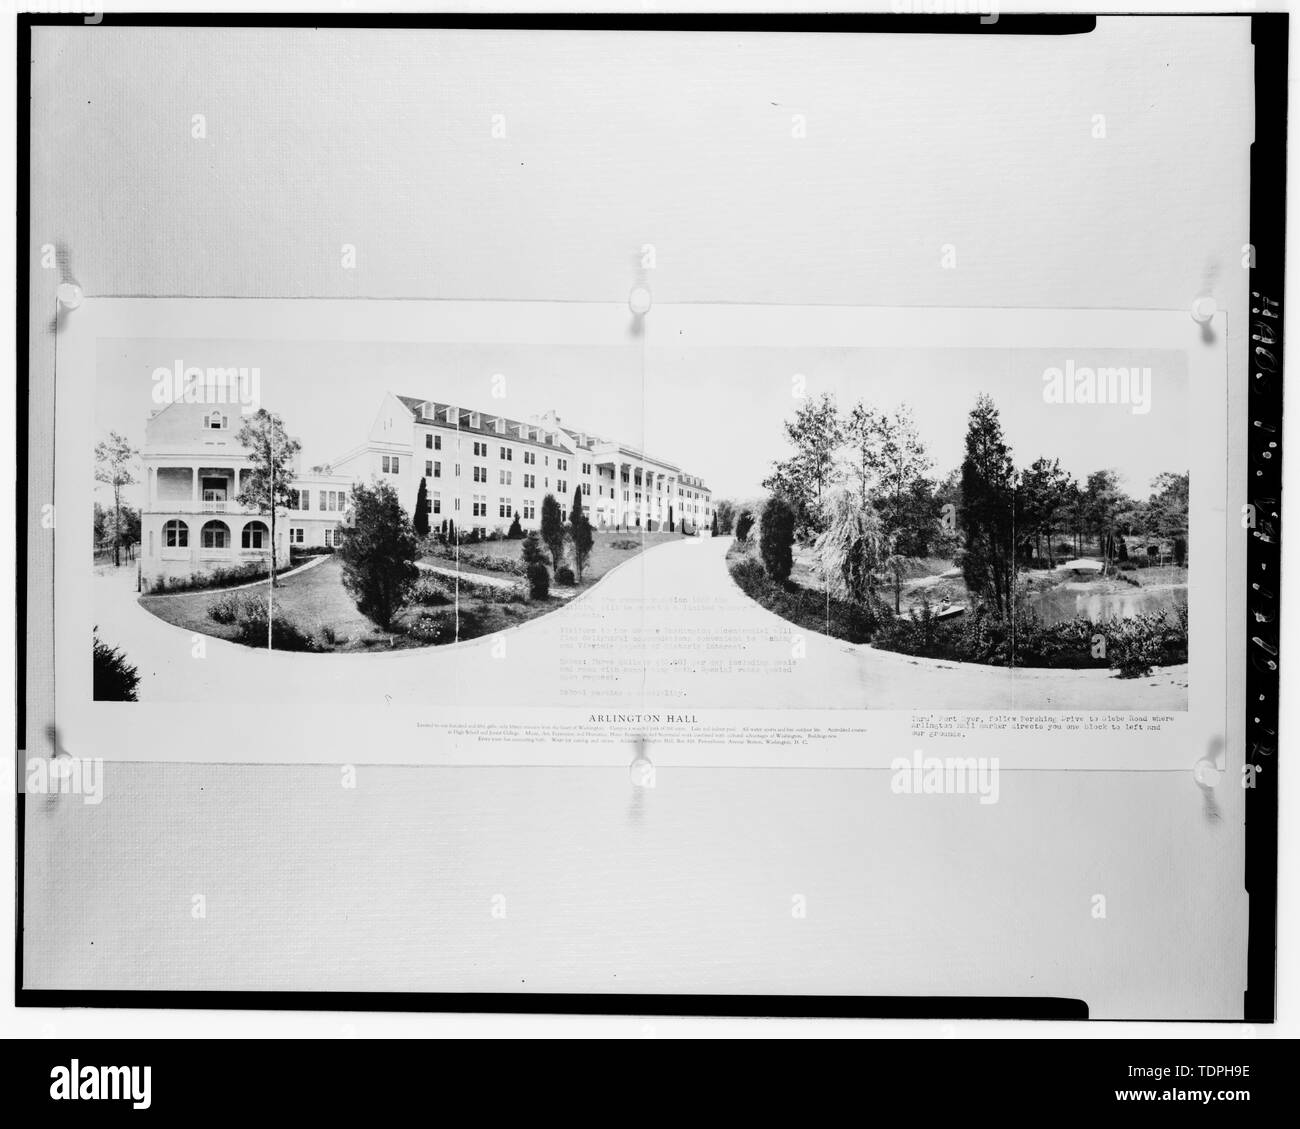 1932 (original print on file at U.S. Army Intelligence Security Command, Fort Belvoir, Virginia). WIDE ANGLE OVERALL VIEW TO SOUTHWEST OF ARLINGTON HALL JUNIOR COLLEGE SHOWING MAIN BUILDING (BUILDING 1) AND POND. - Arlington Hall Station, 4000 Arlington Boulevard, Arlington, Arlington County, VA; VanDyke, Tina, transmitter Stock Photo